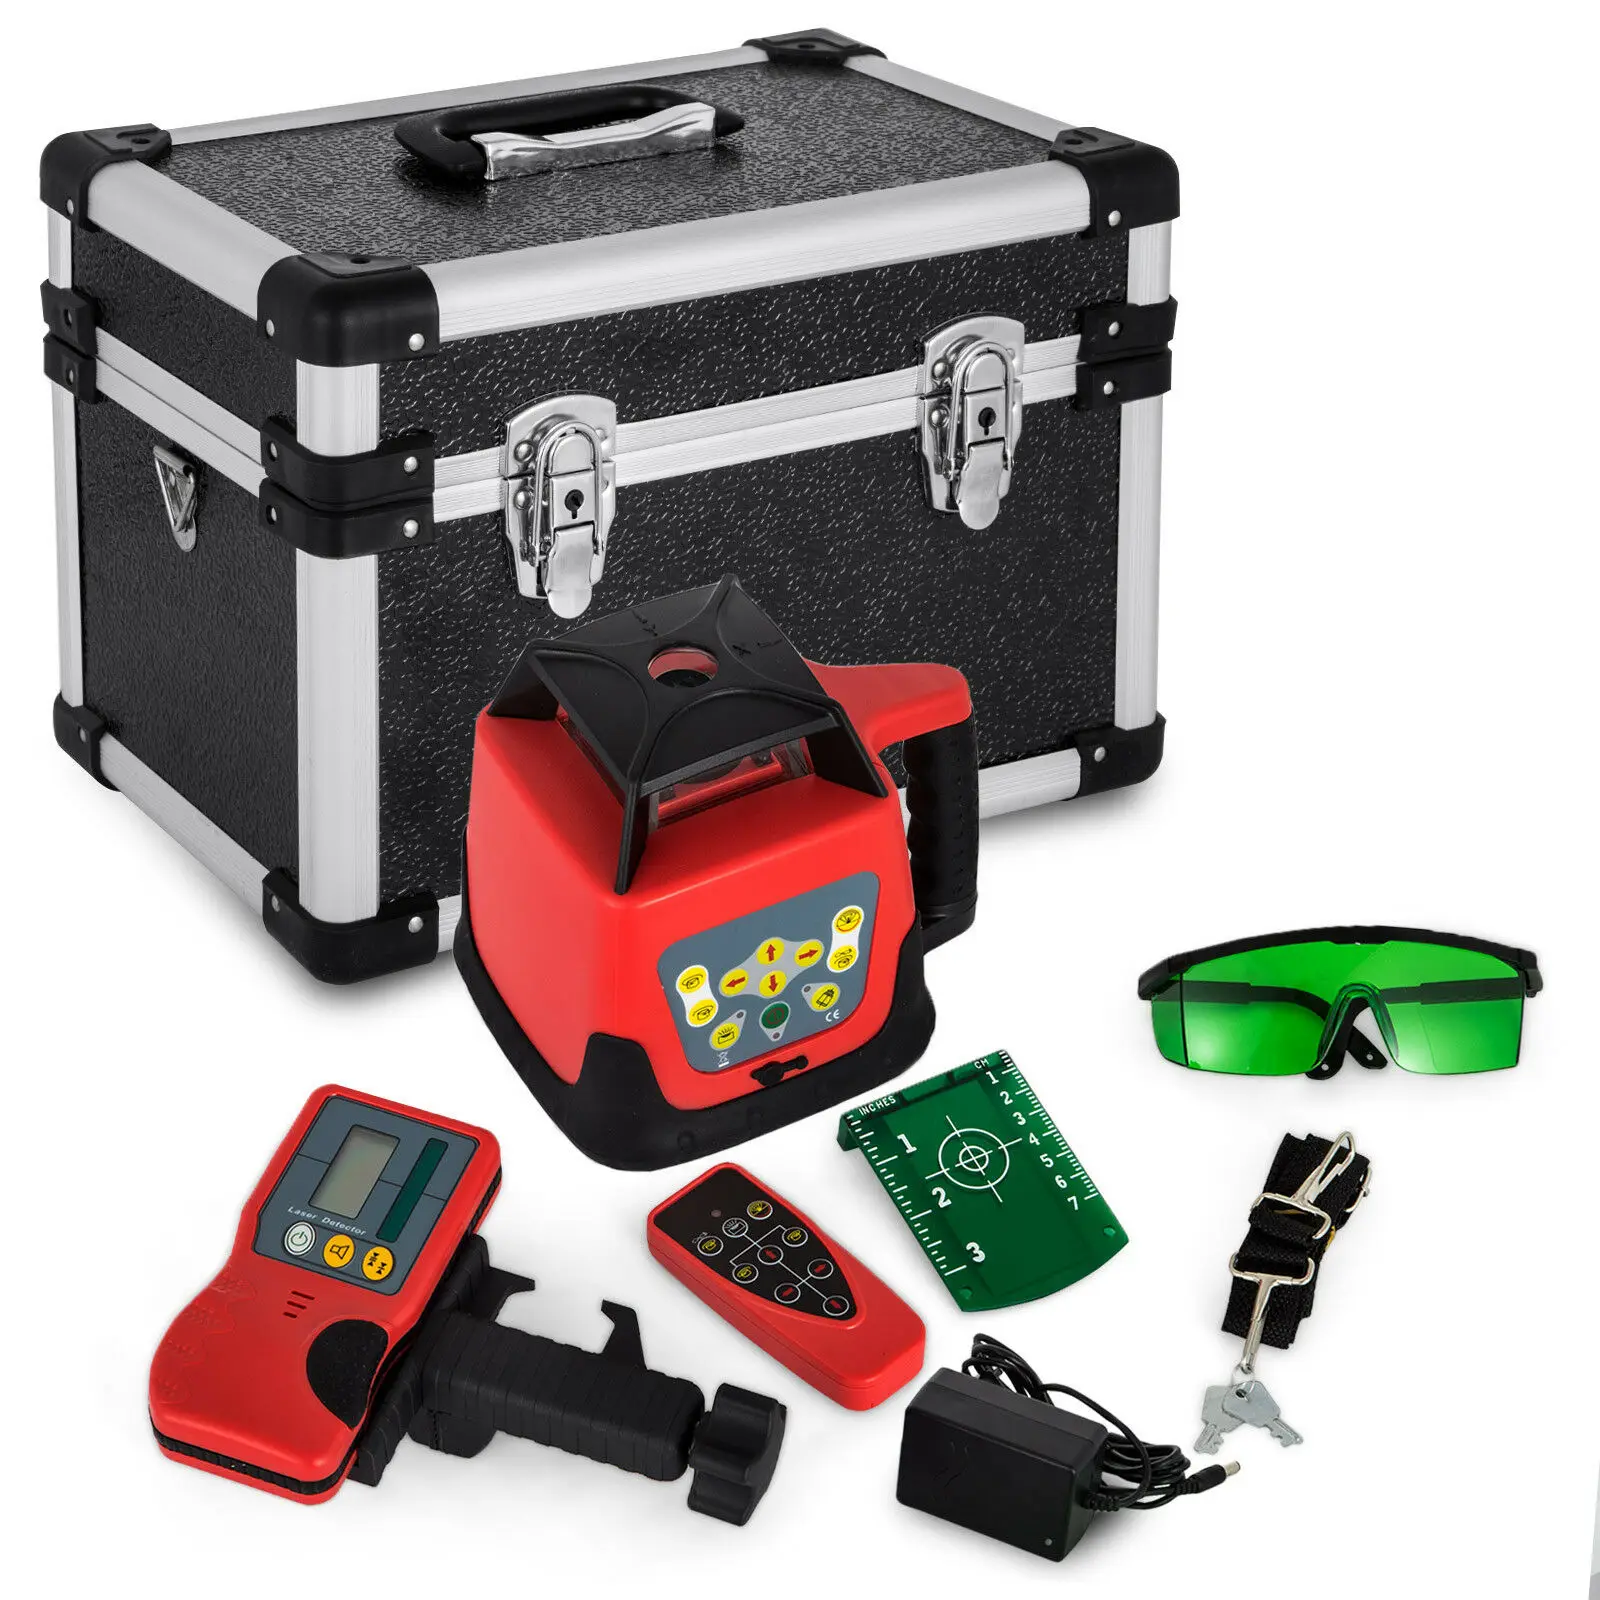 Automatic Self-leveling Rotary Laser Level Green beam 500m range &remote control 